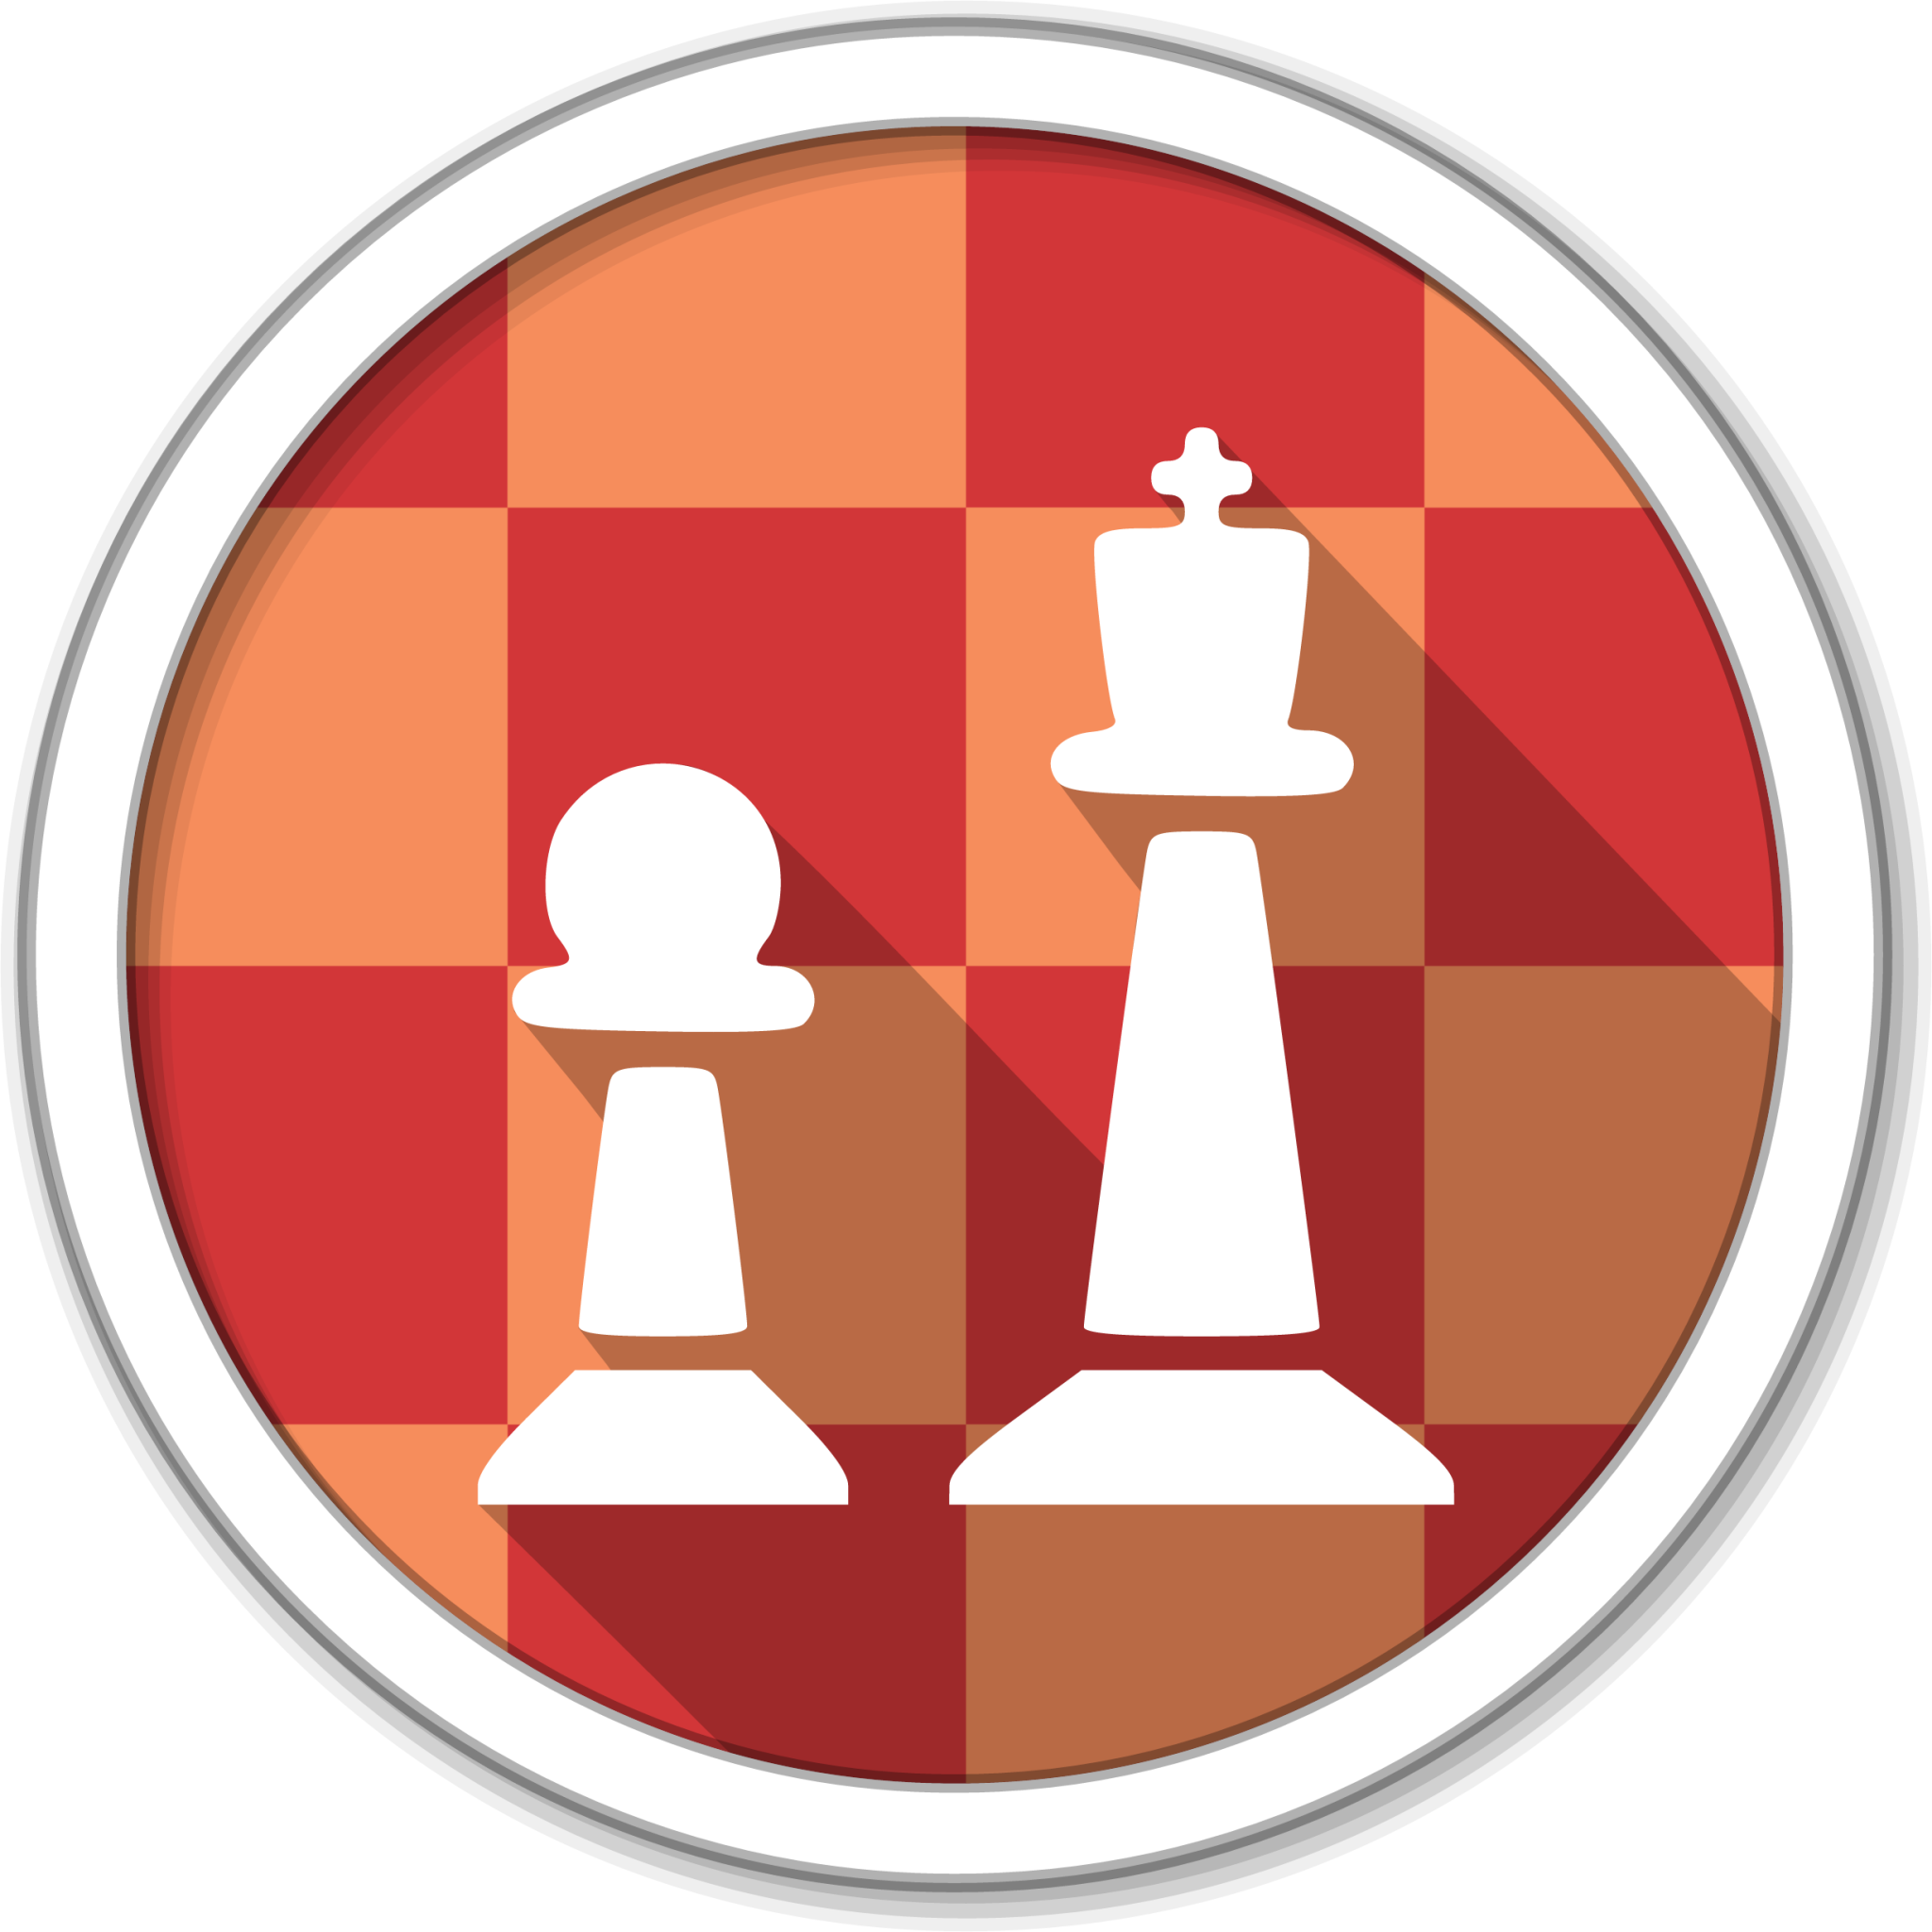 lichess Icon - Download for free – Iconduck